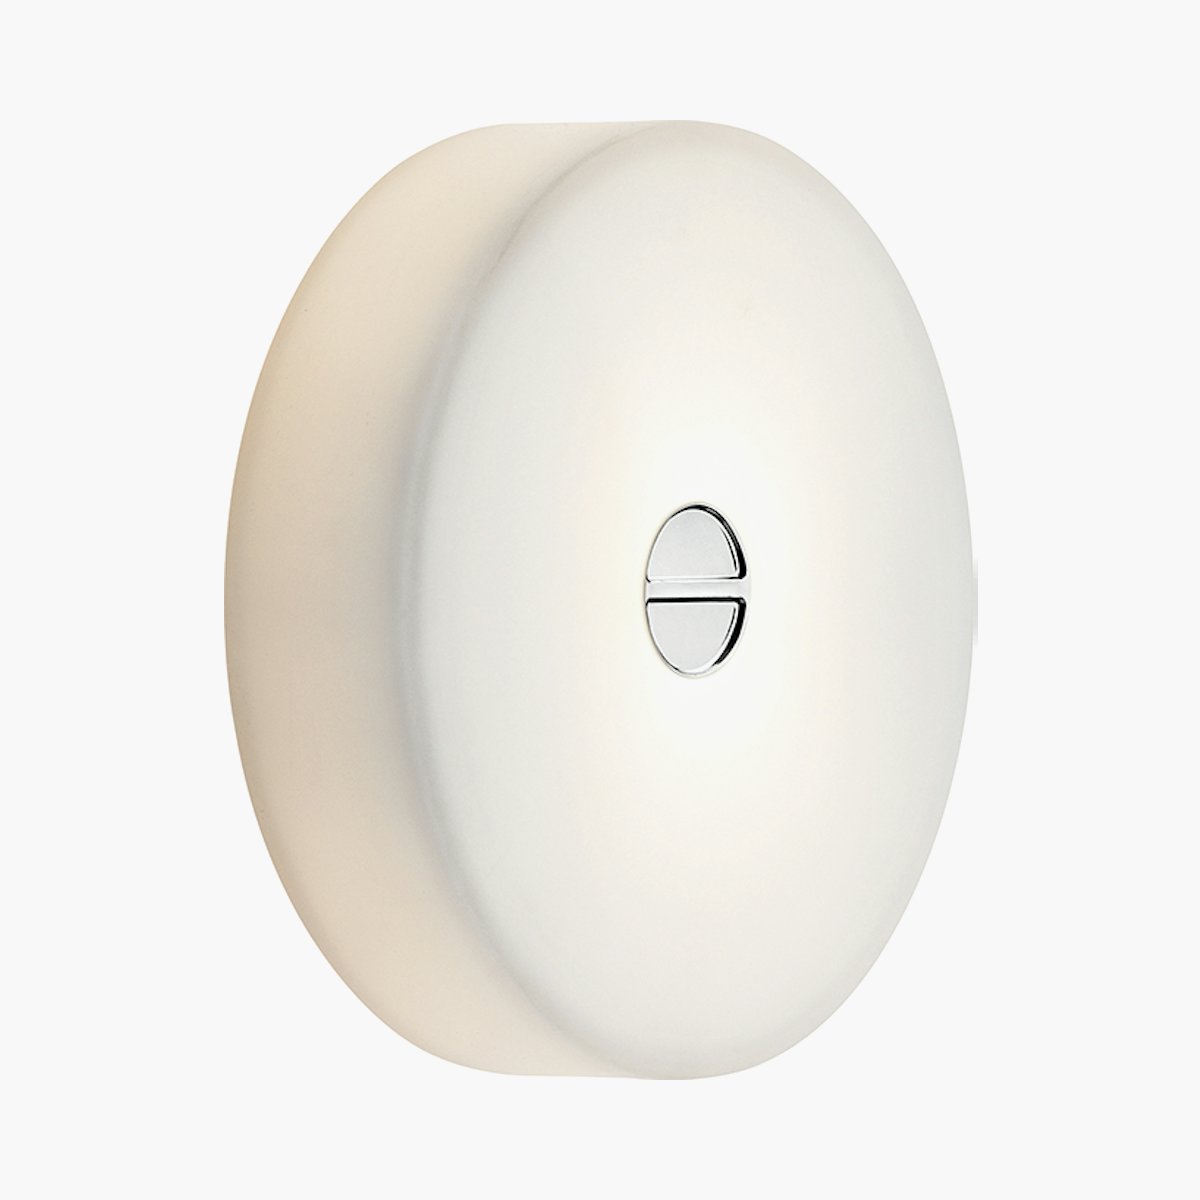 Mini Button Wall and Ceiling Light Outlet